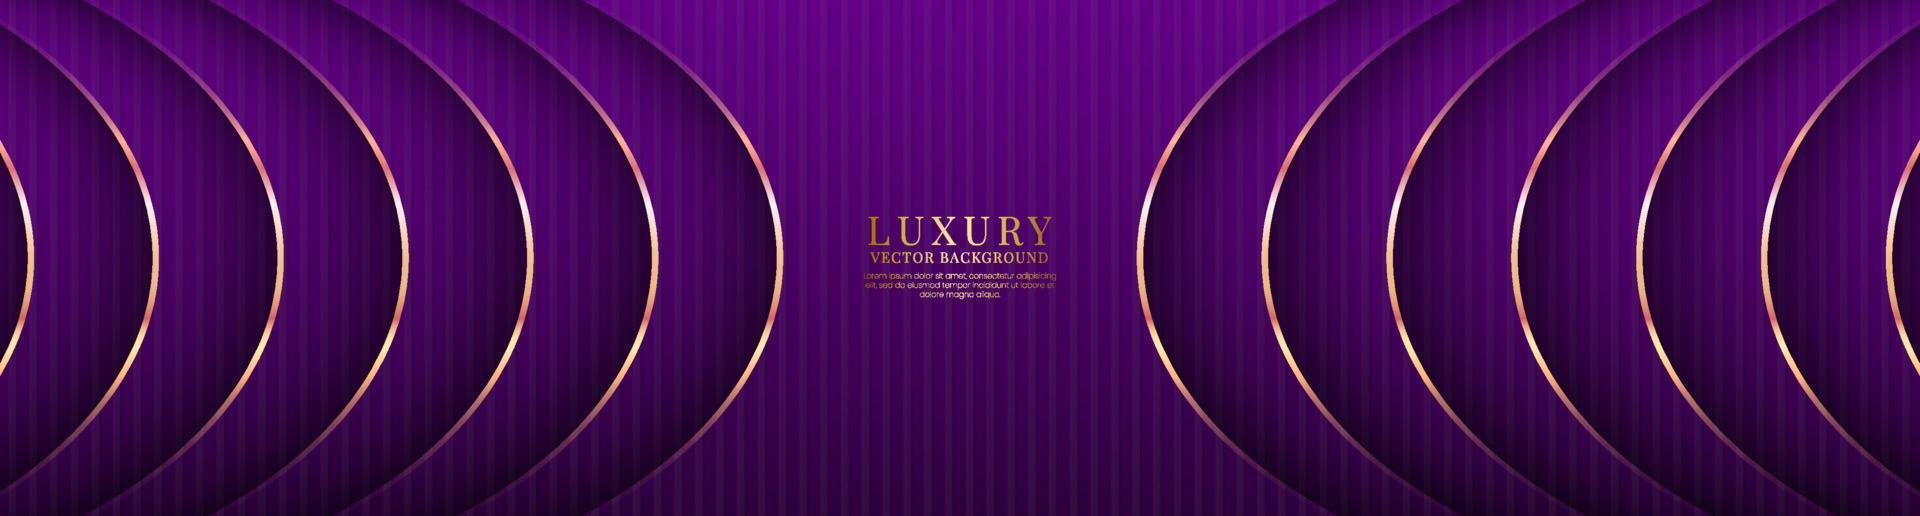 3D purple luxury abstract background overlap layers on dark space with golden curve decoration. Graphic design element cutout style concept for banner, flyer, card, brochure cover, or landing page vector